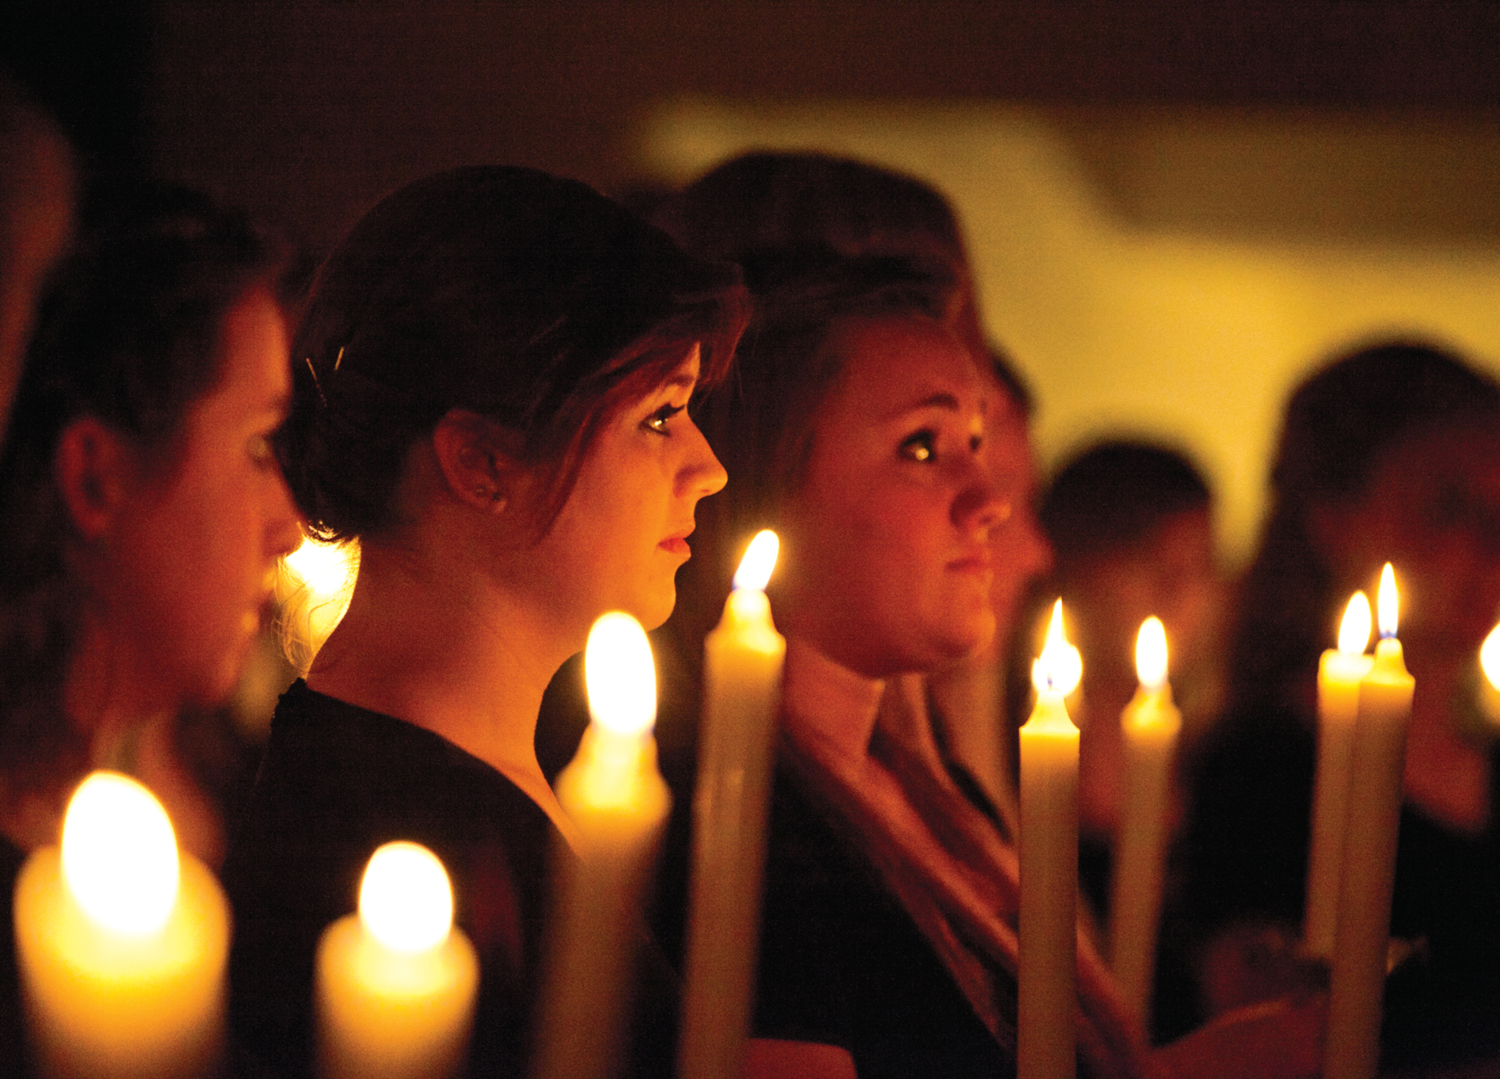 JBU to Hold Annual Candlelight Service